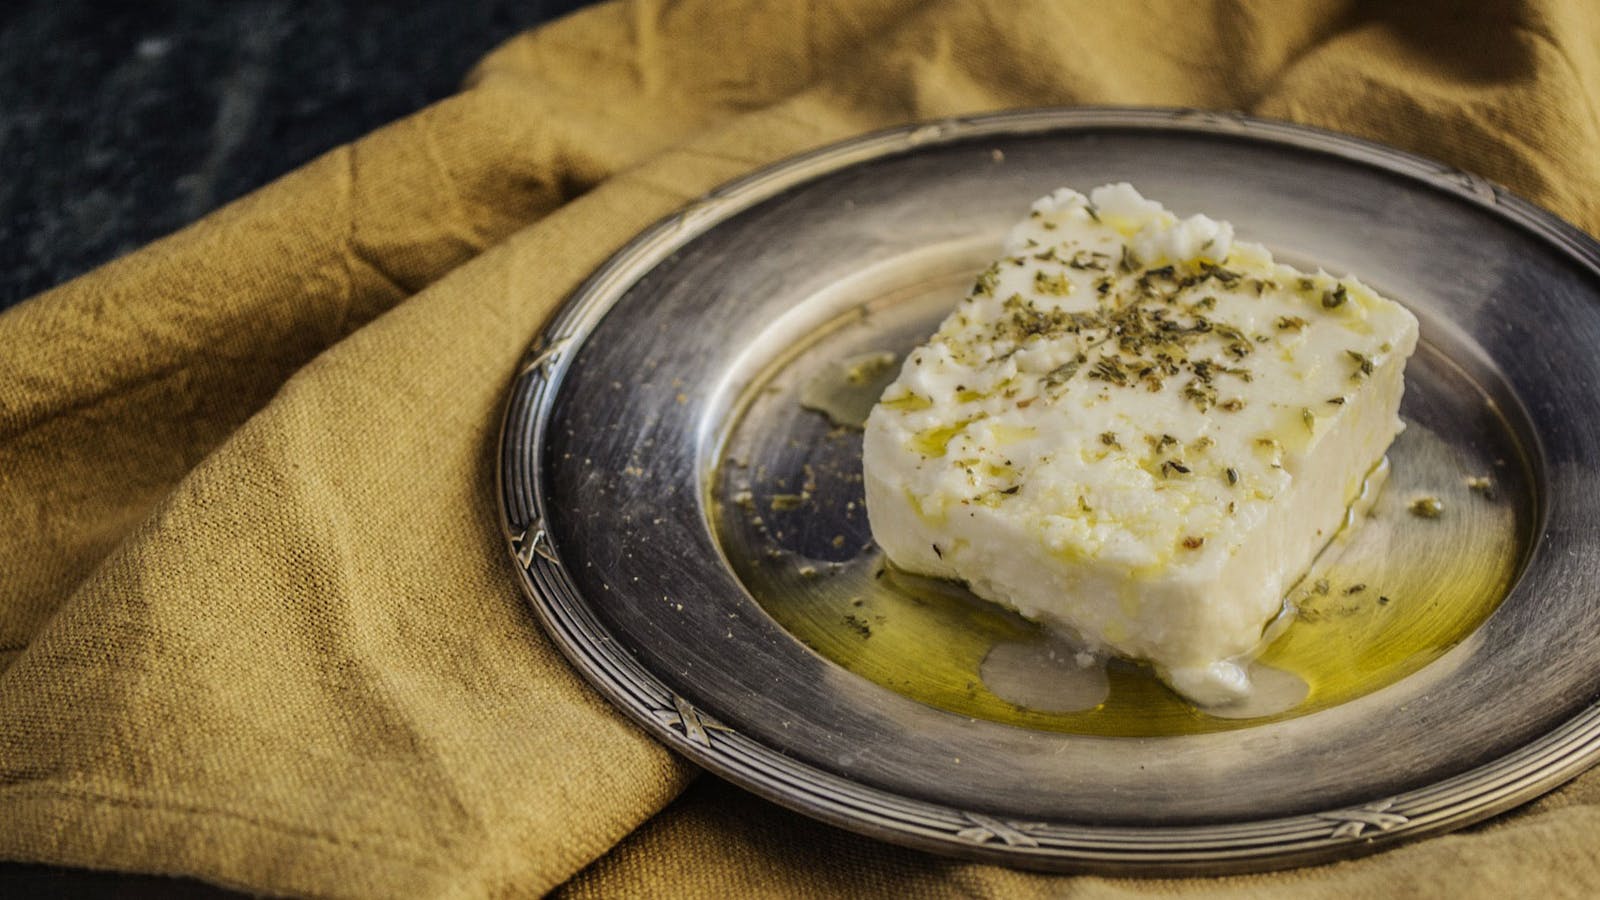 Grandma's old trick to keep the feta fresh, even for months